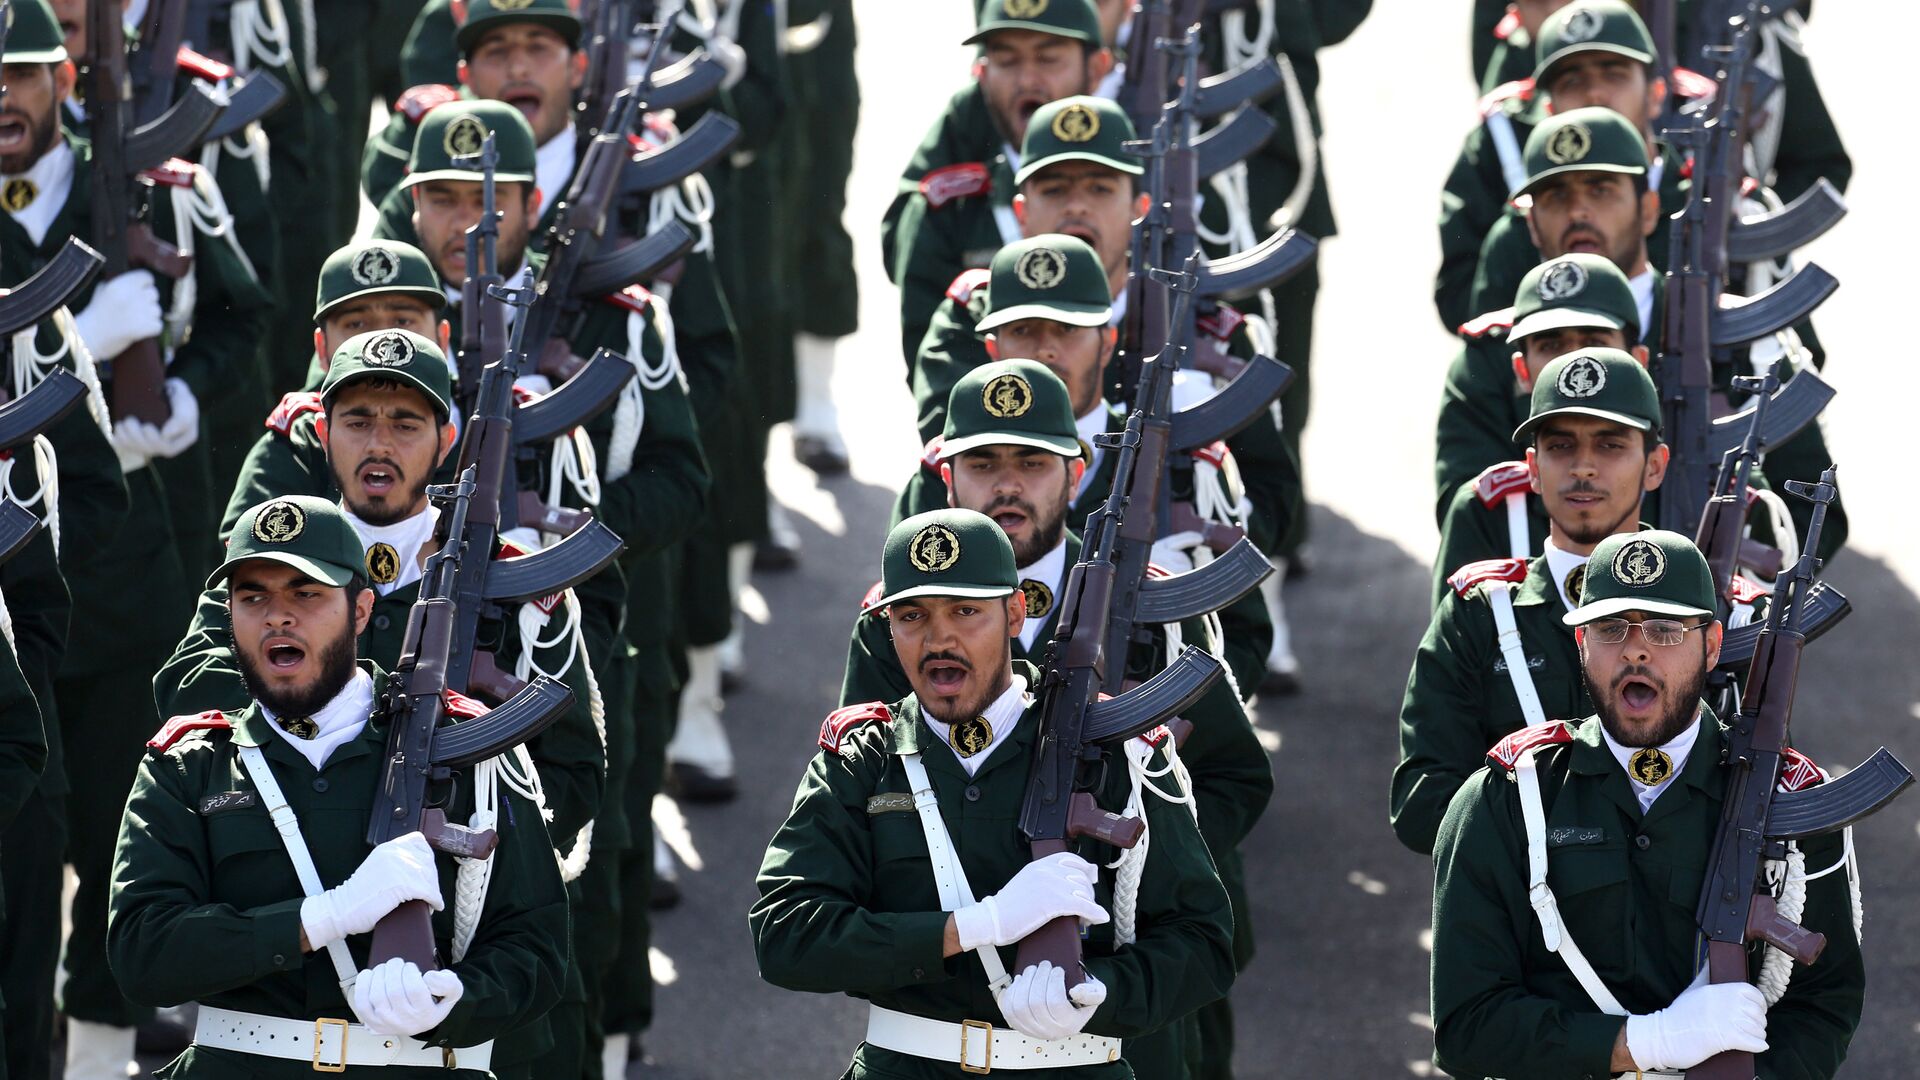 Members of the Iran's Revolutionary Guard march during an annual military parade marking the 34th anniversary of outset of the 1980-88 Iran-Iraq war, in front of the mausoleum of the late revolutionary founder Ayatollah Khomeini just outside Tehran, Iran, Monday, Sept. 22, 2014 - Sputnik International, 1920, 30.09.2021